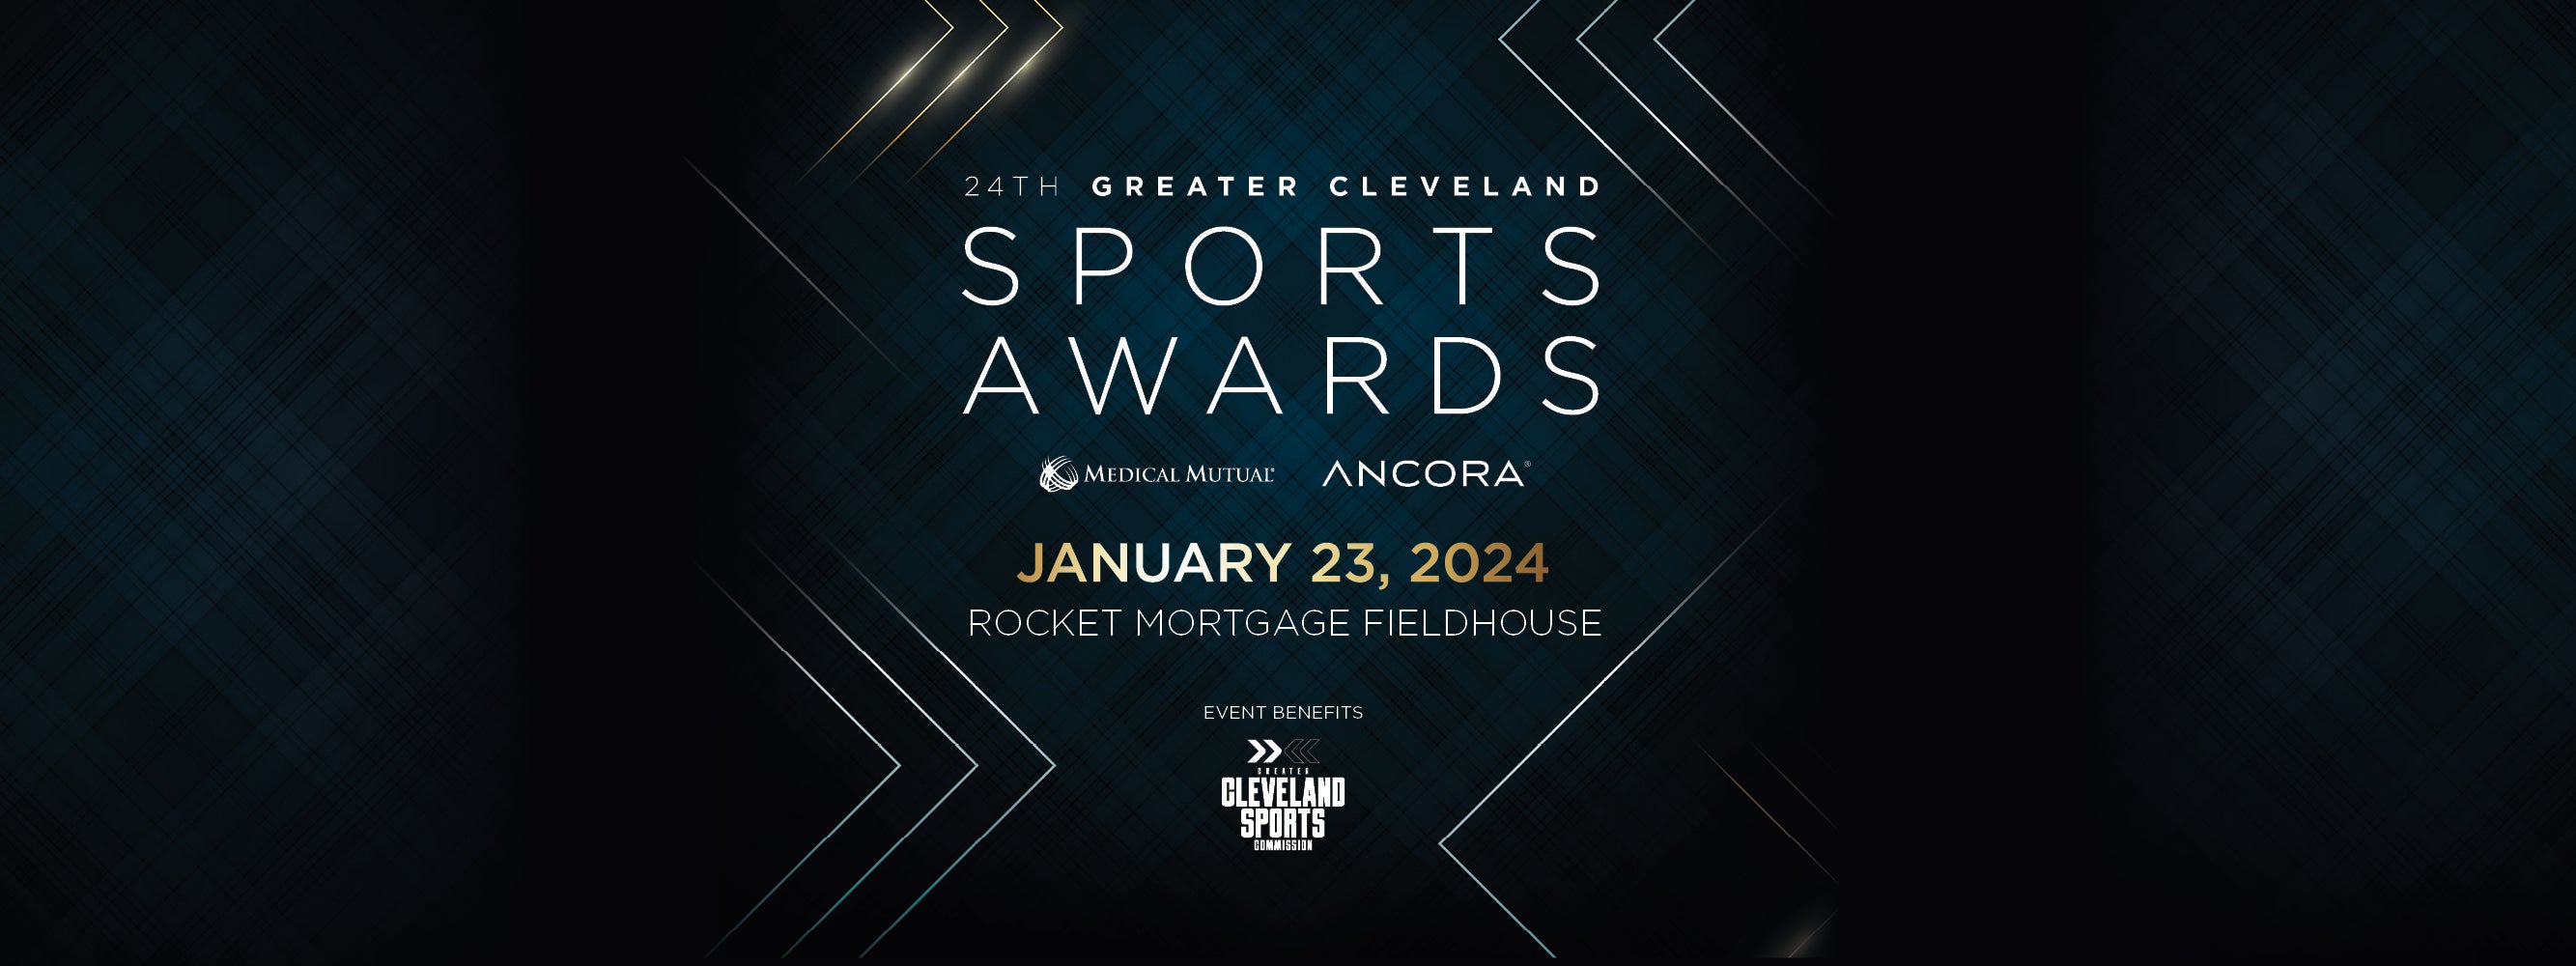 24th Greater Cleveland Sports Awards